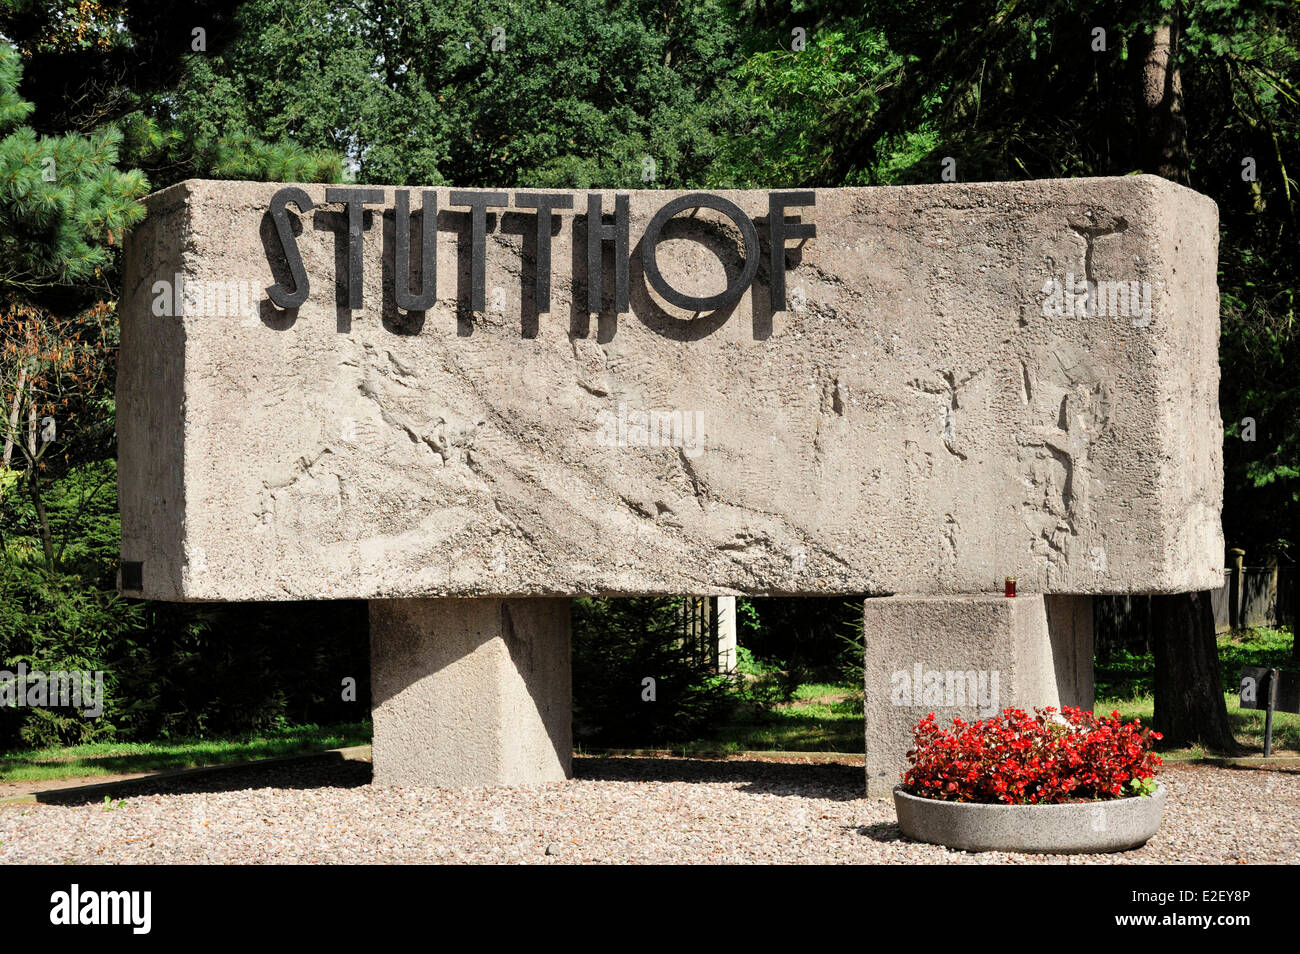 Poland, Pomerania, Sztutowo, concentration camp of Stutthof, memorial at the entrance Stock Photo